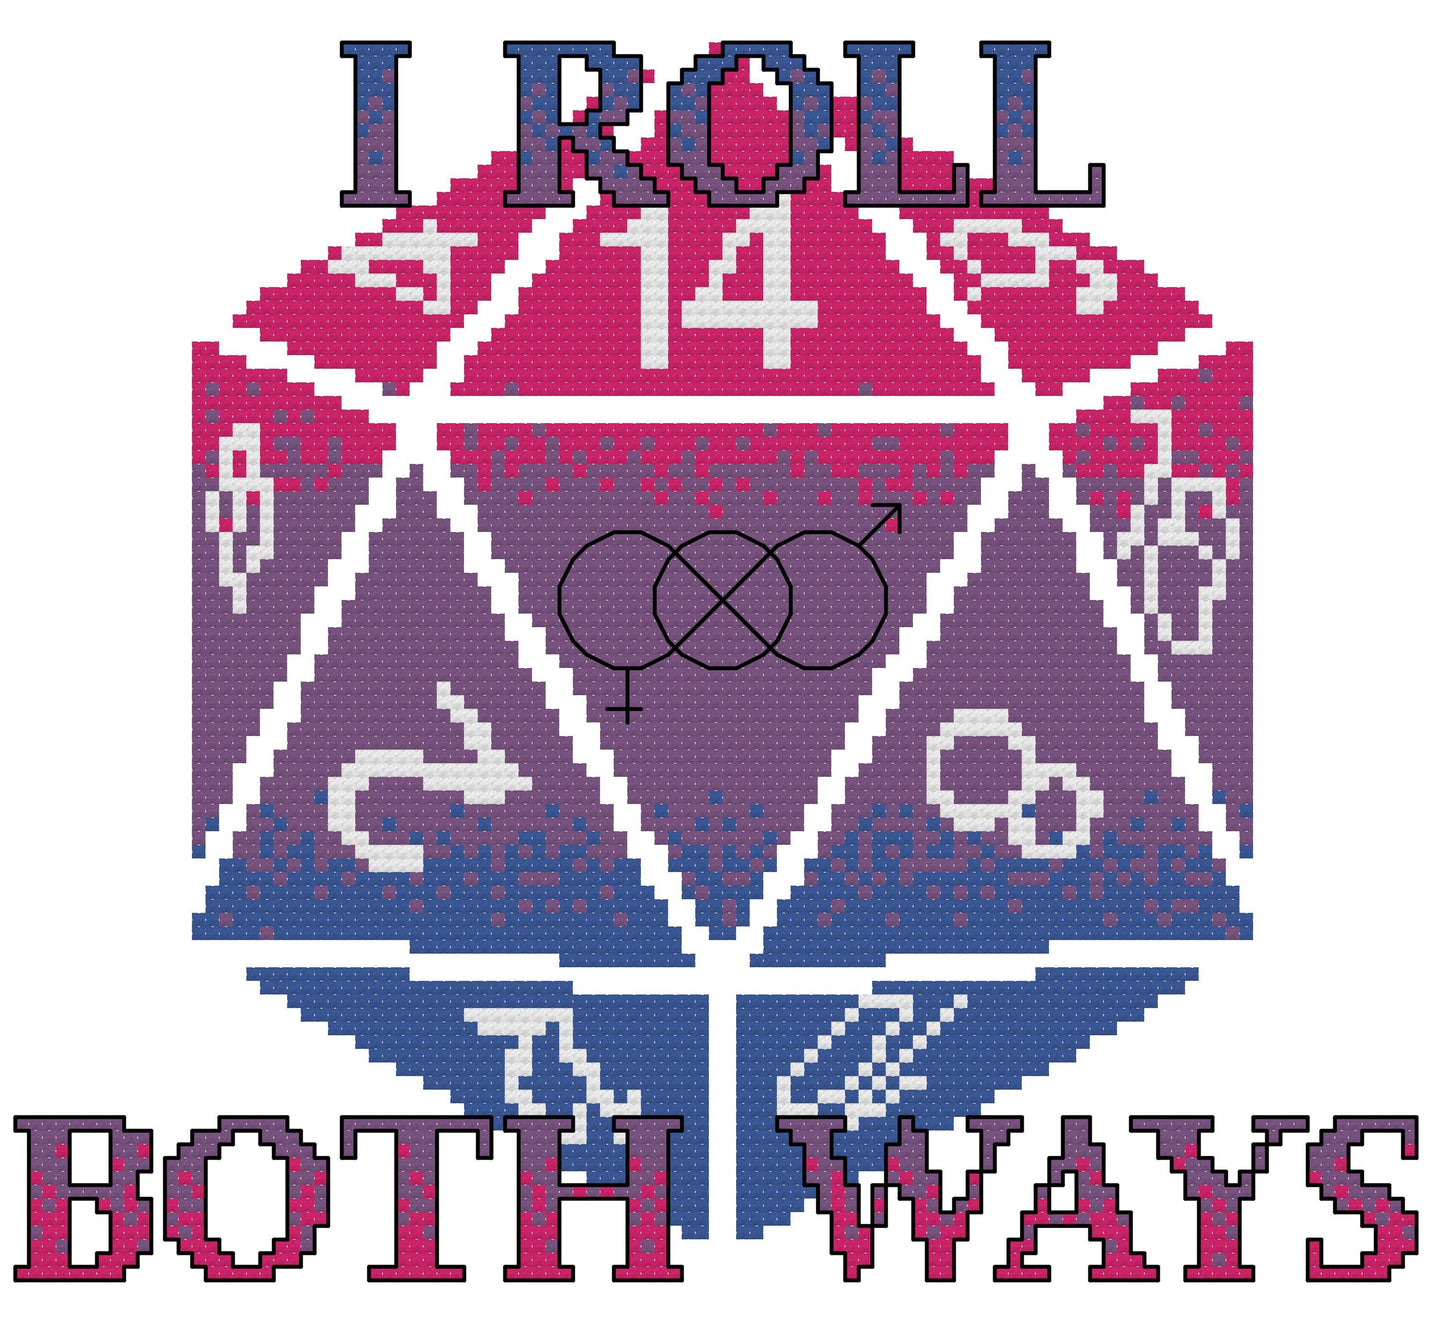 Bisexual pride flag D20 PDF cross stitch pattern: "Dicexuality"